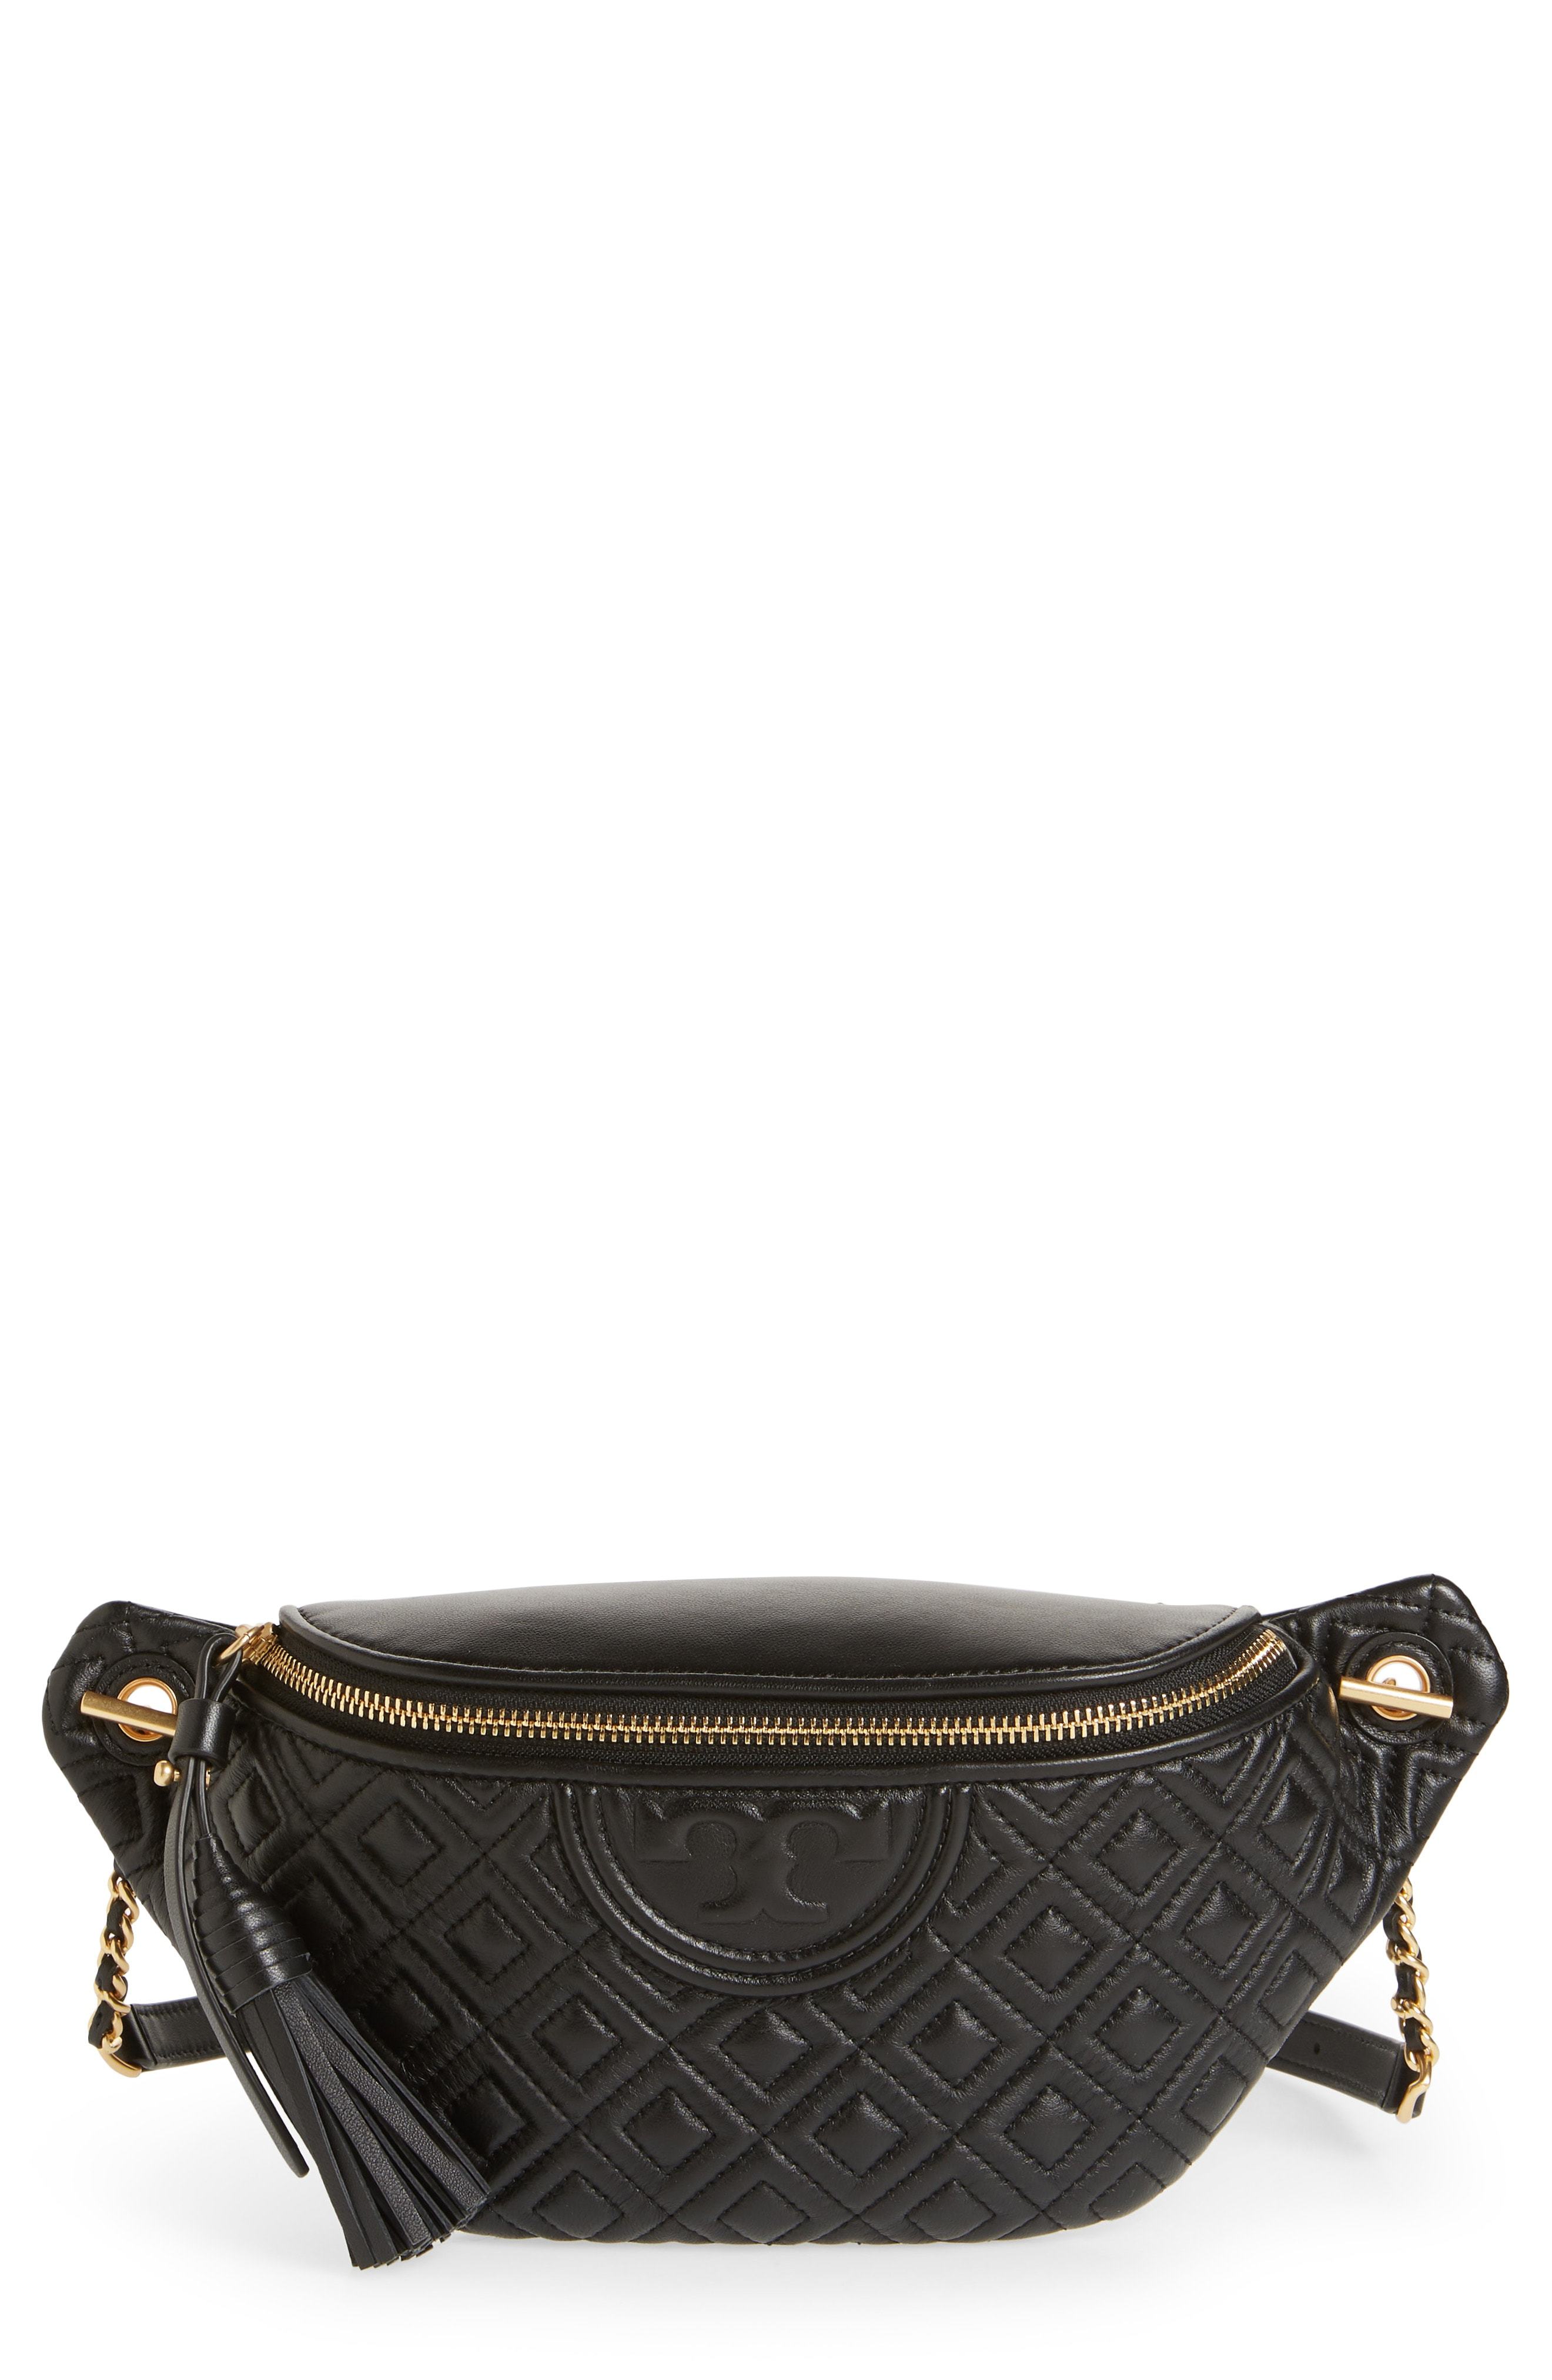 Tory Burch Fleming Quilted Leather Belt Bag, $278 | Nordstrom | Lookastic